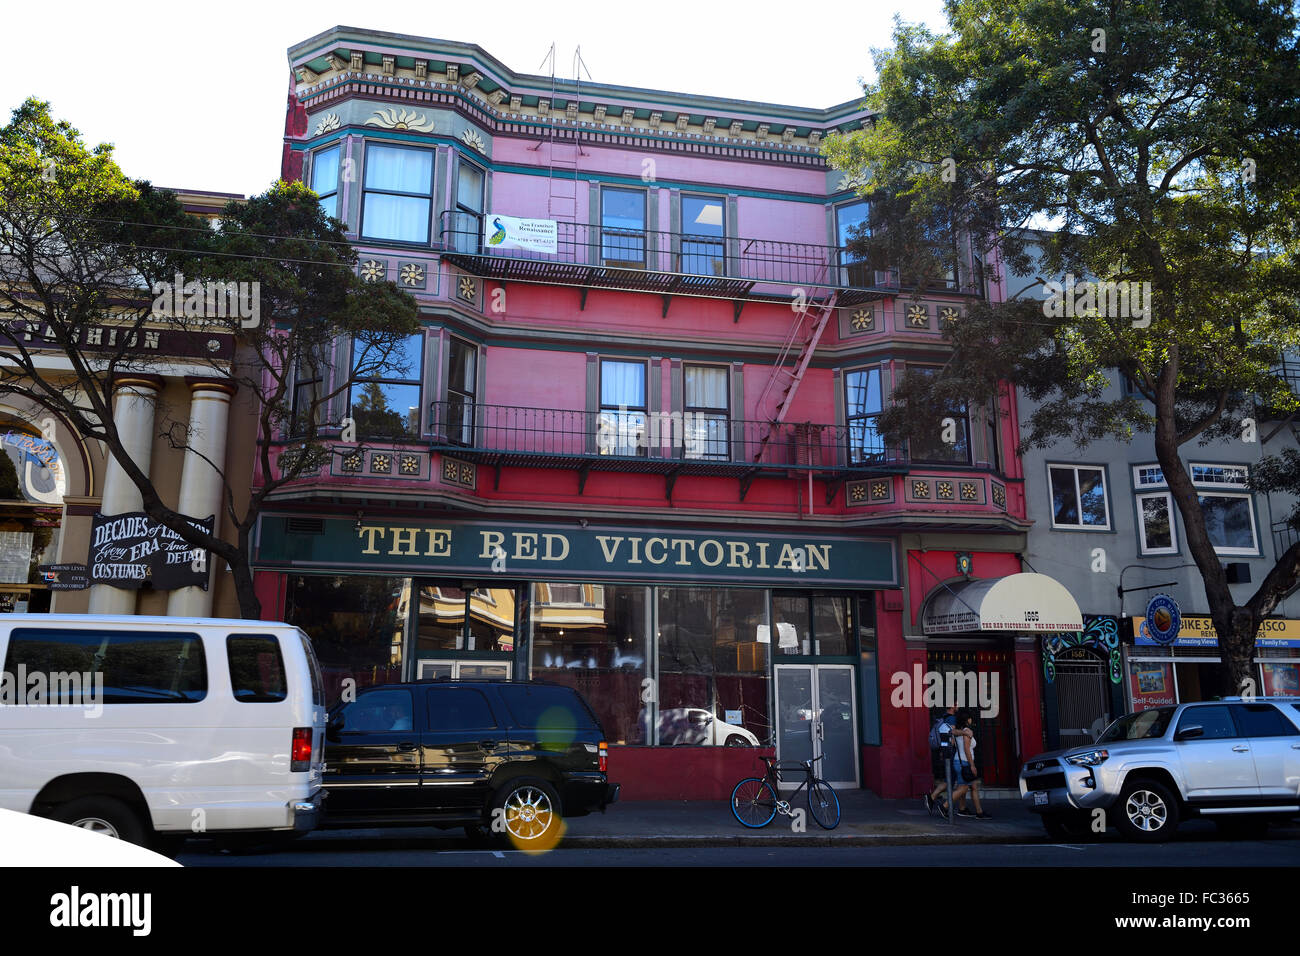 The Red Victorian Cafe In Haight Ashbury District Of San Francisco FC3665 